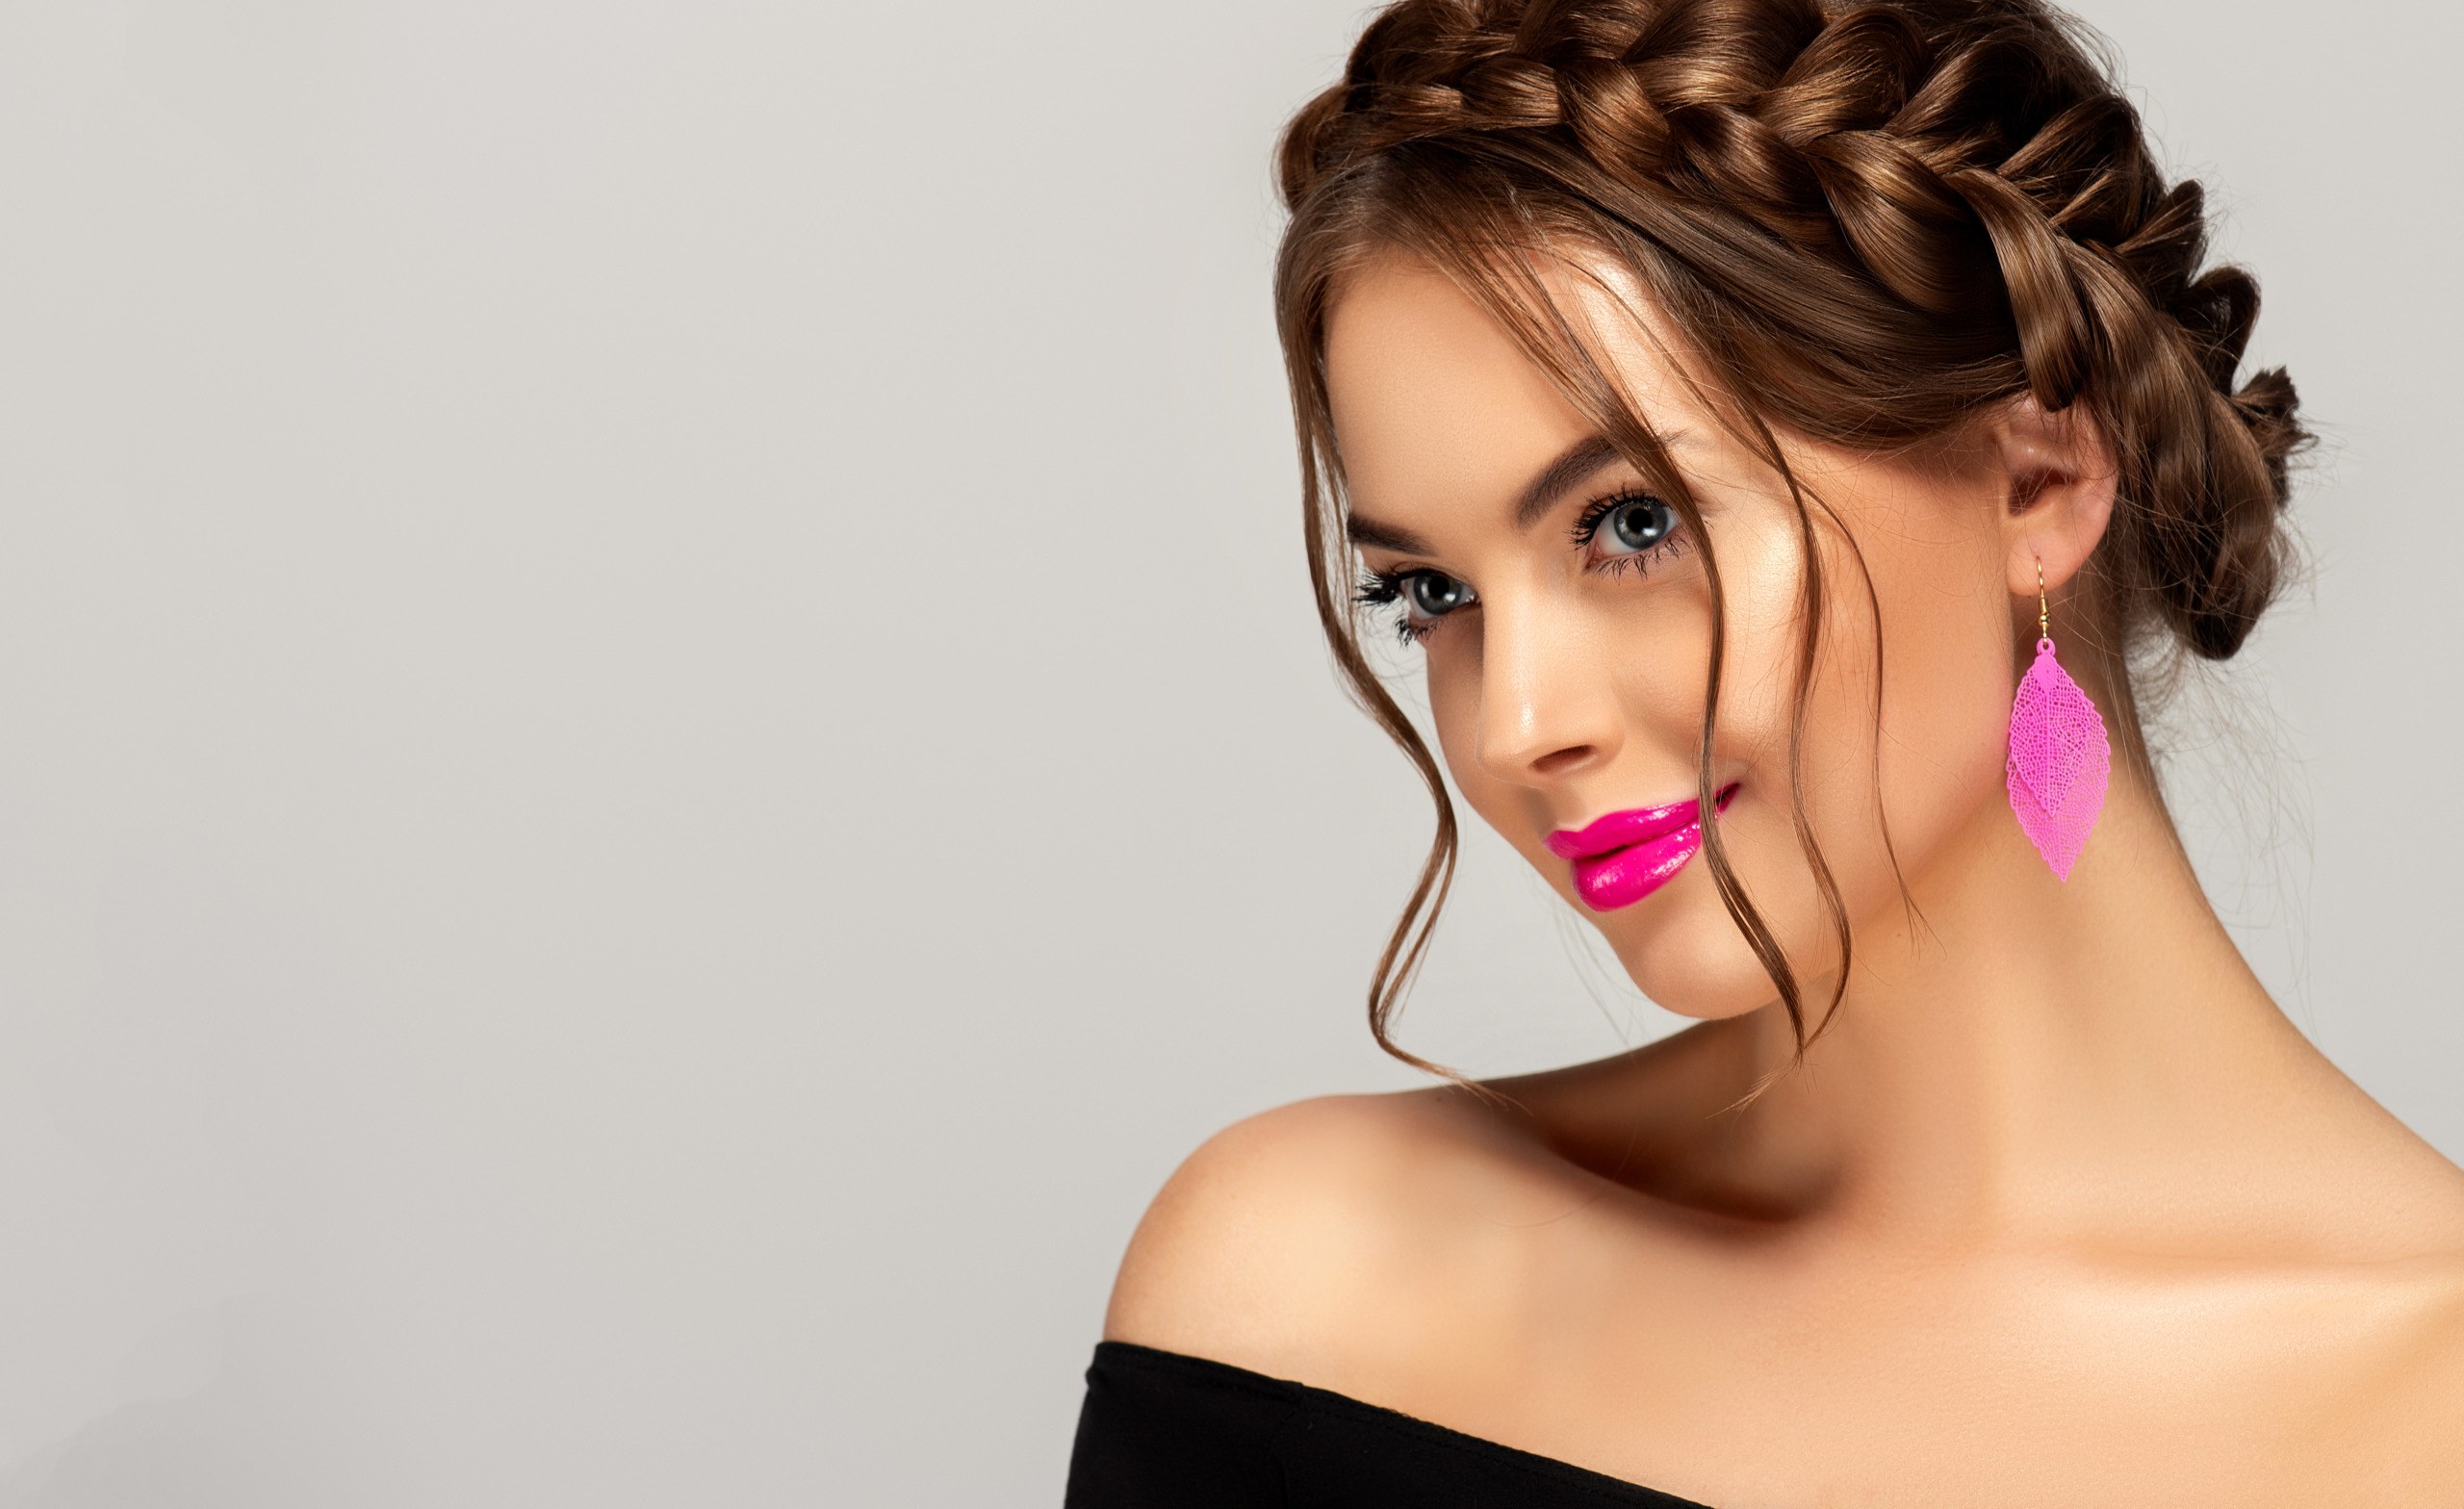 30 Cute Hairstyles For Teen Girls That Are Youthful, Easy and Trendy